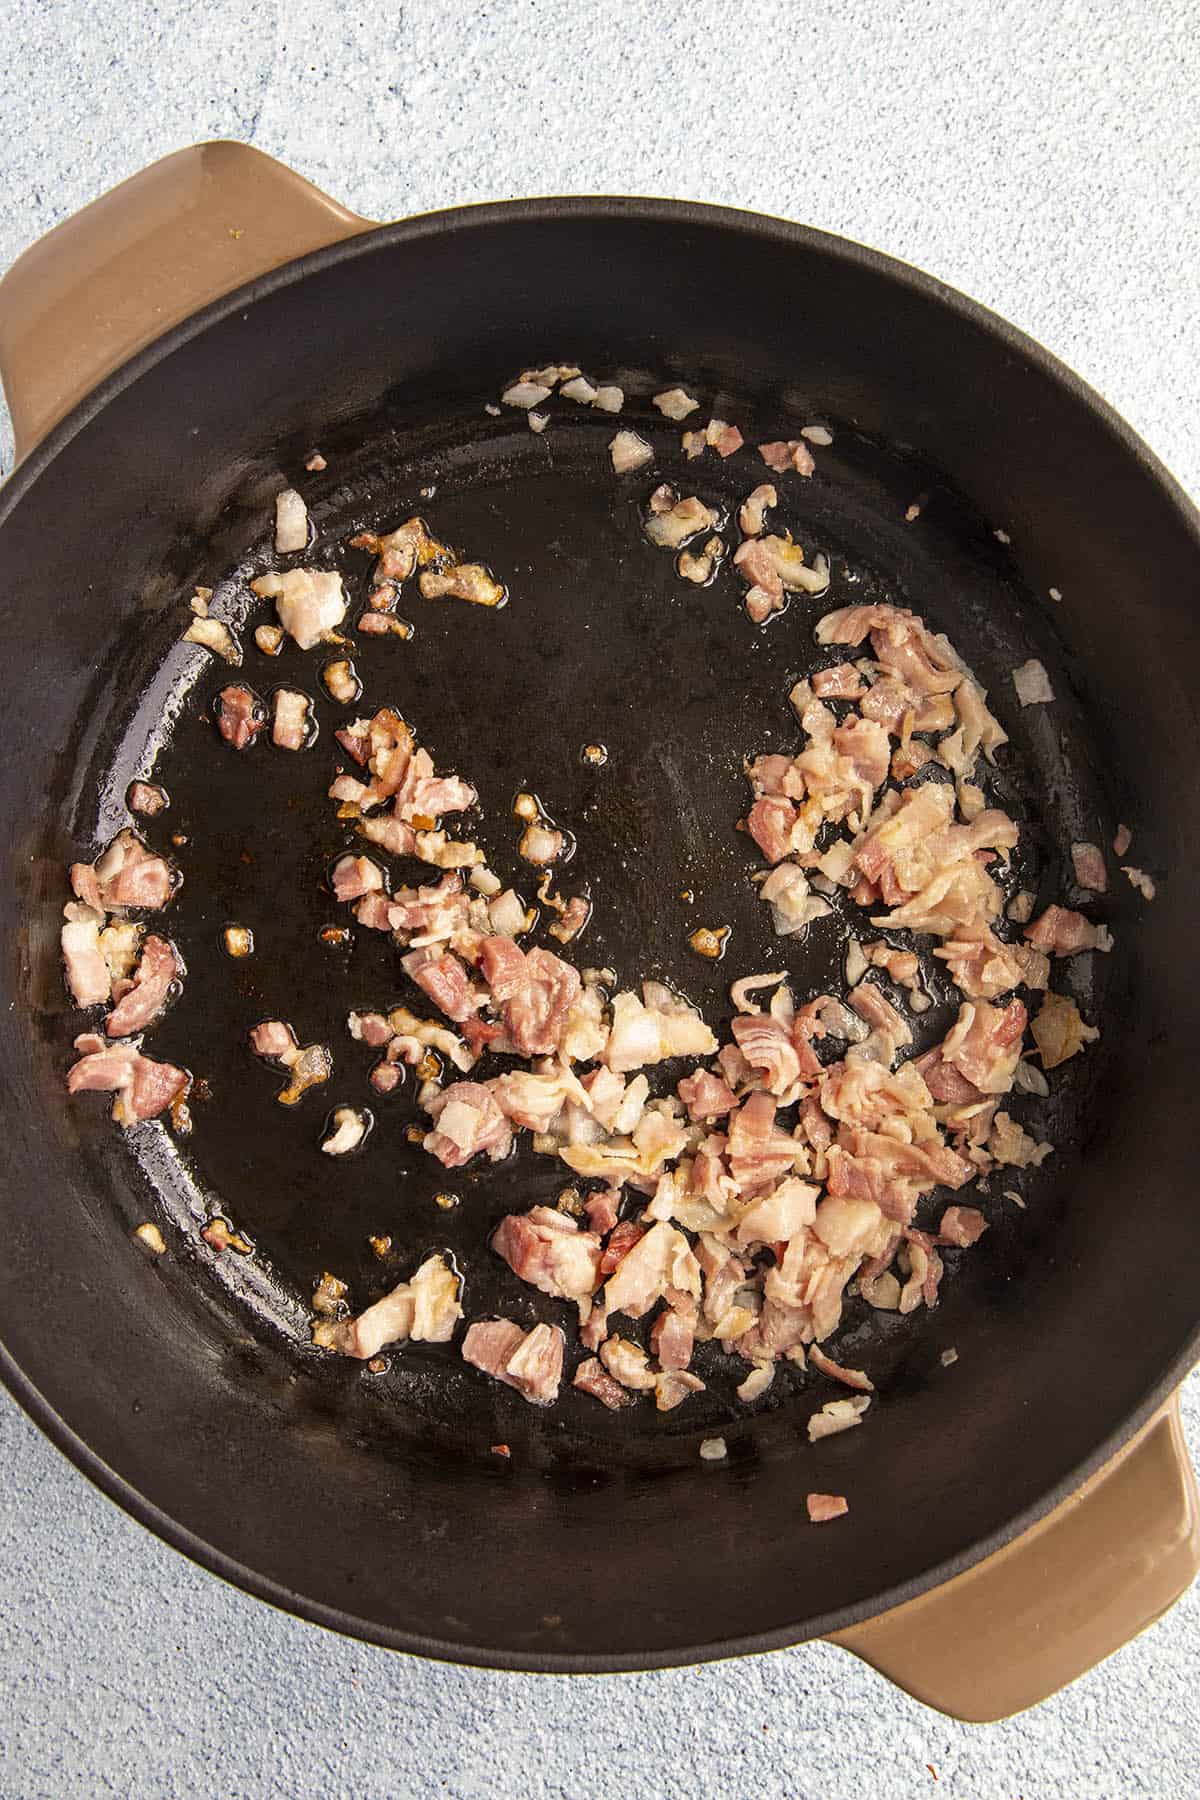 Cooking bacon in the pot